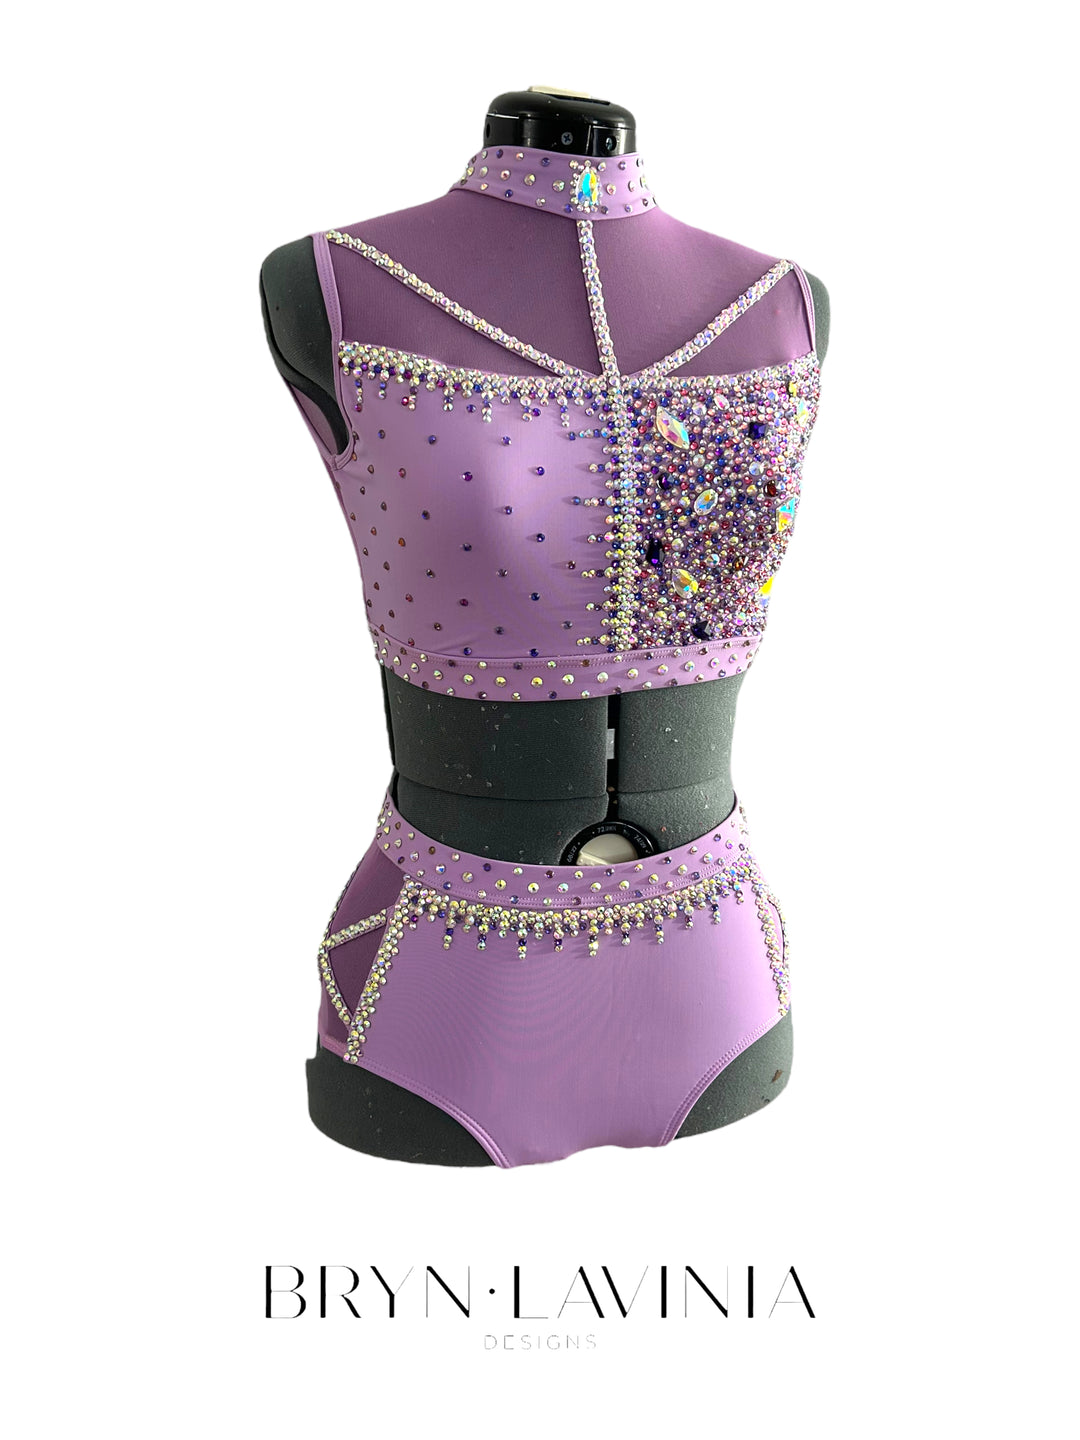 NEW Adult Medium light orchid ready to ship costume